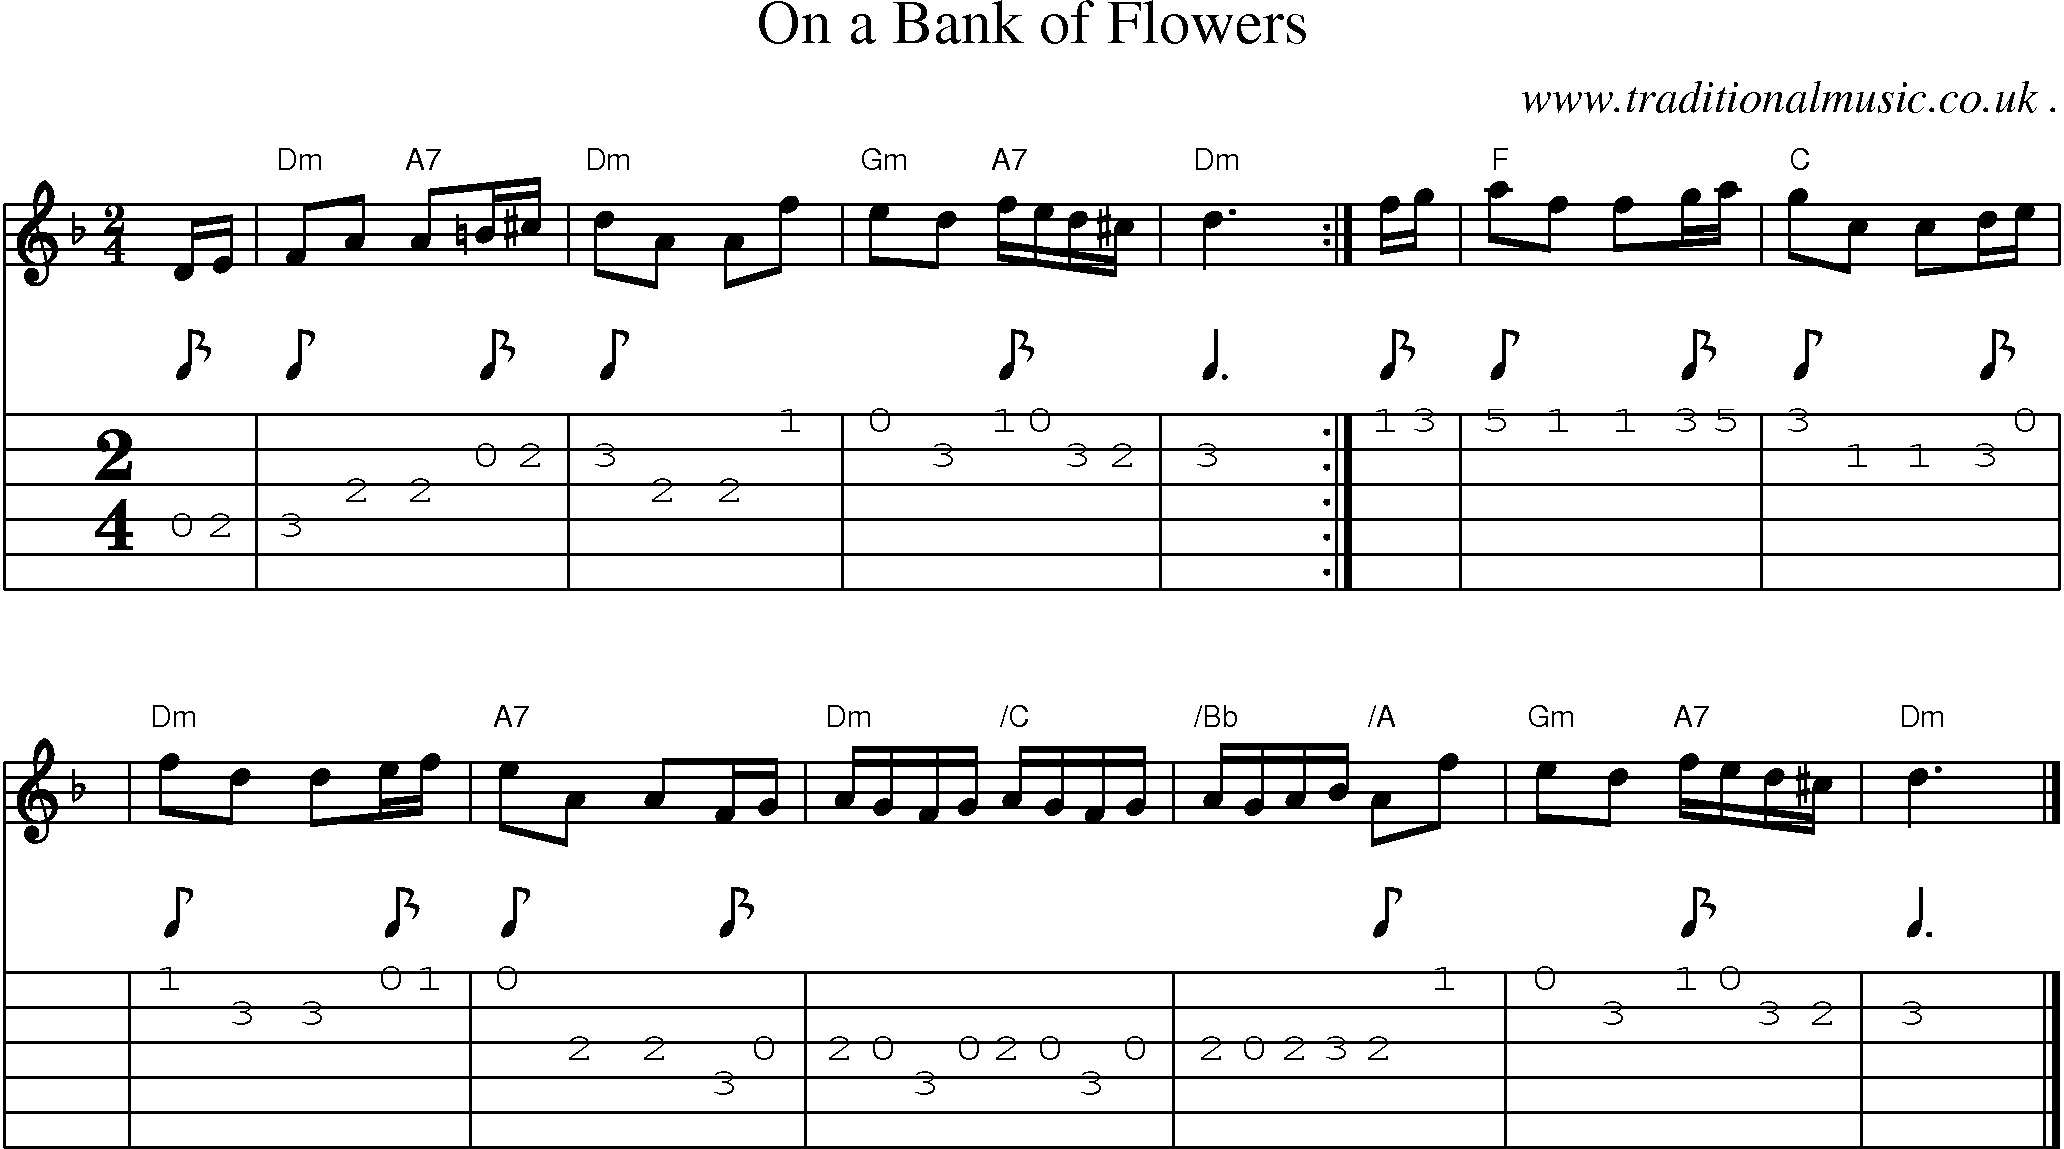 Sheet-music  score, Chords and Guitar Tabs for On A Bank Of Flowers